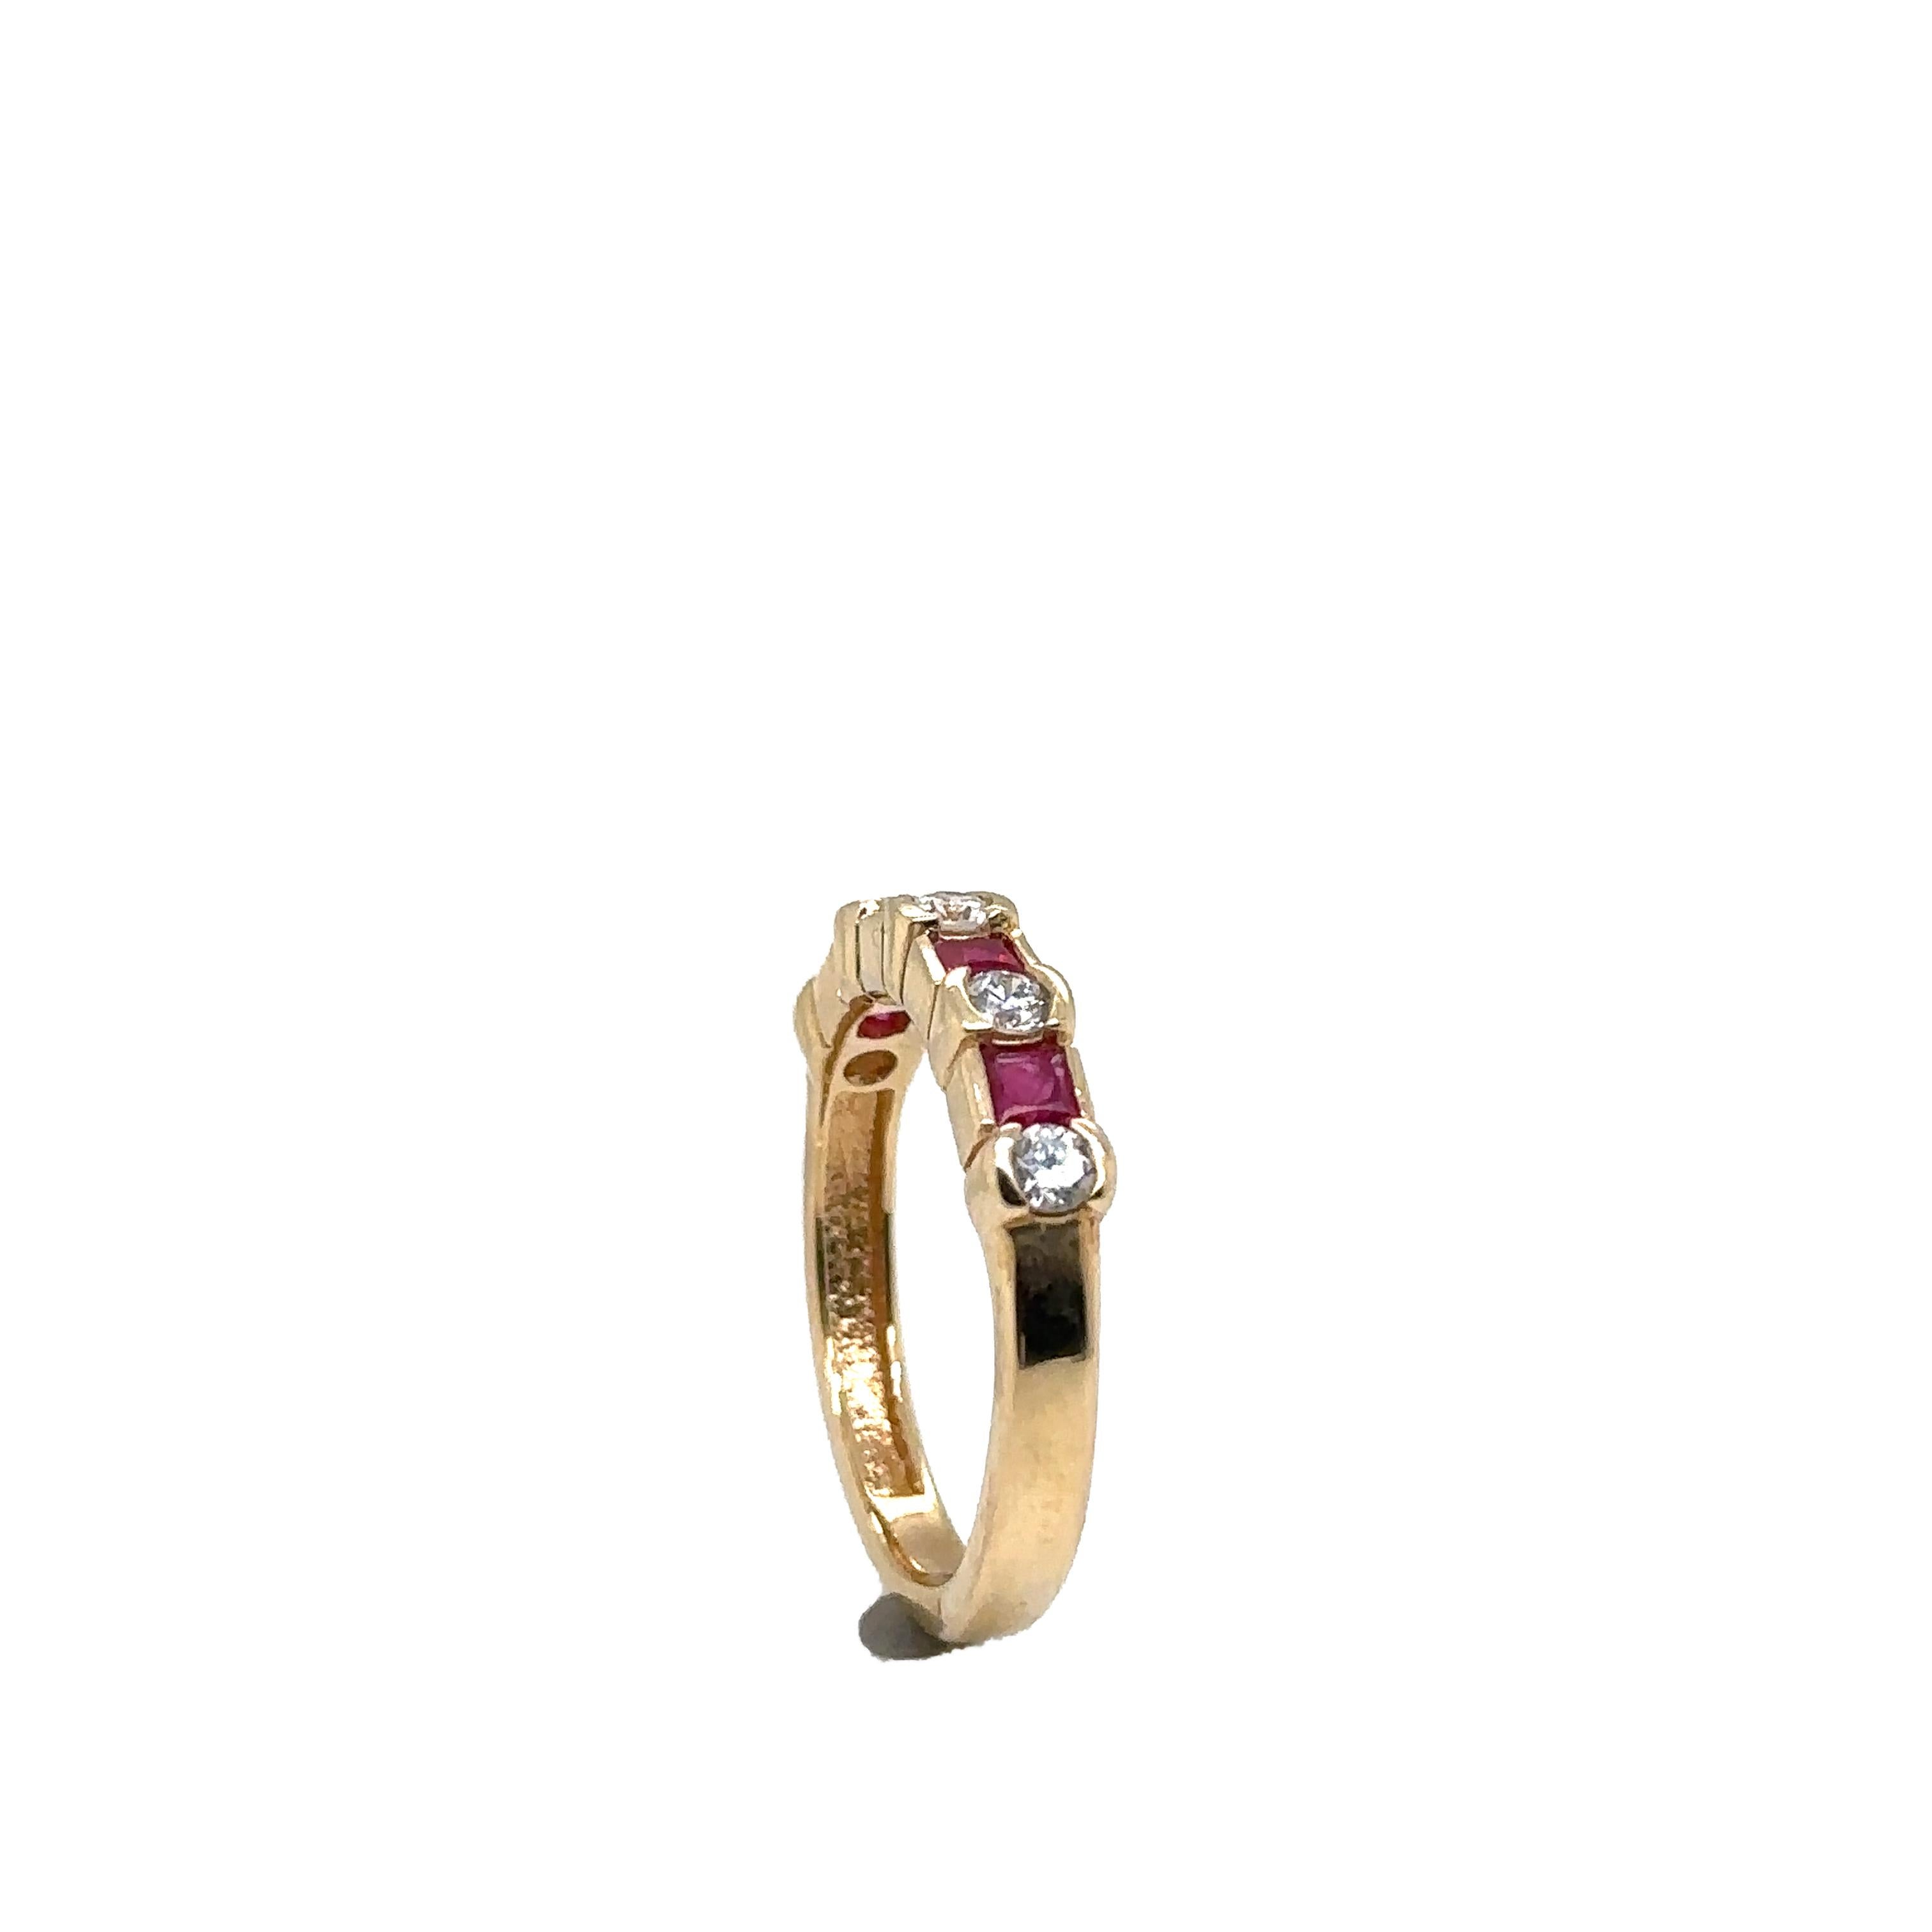 JAS-21-2221 - 14K YELLOW GOLD 0.35Ct GH-SI1 DIAS AND 0.40CT PRINCESS CUT RUBIES In New Condition For Sale In New York, NY